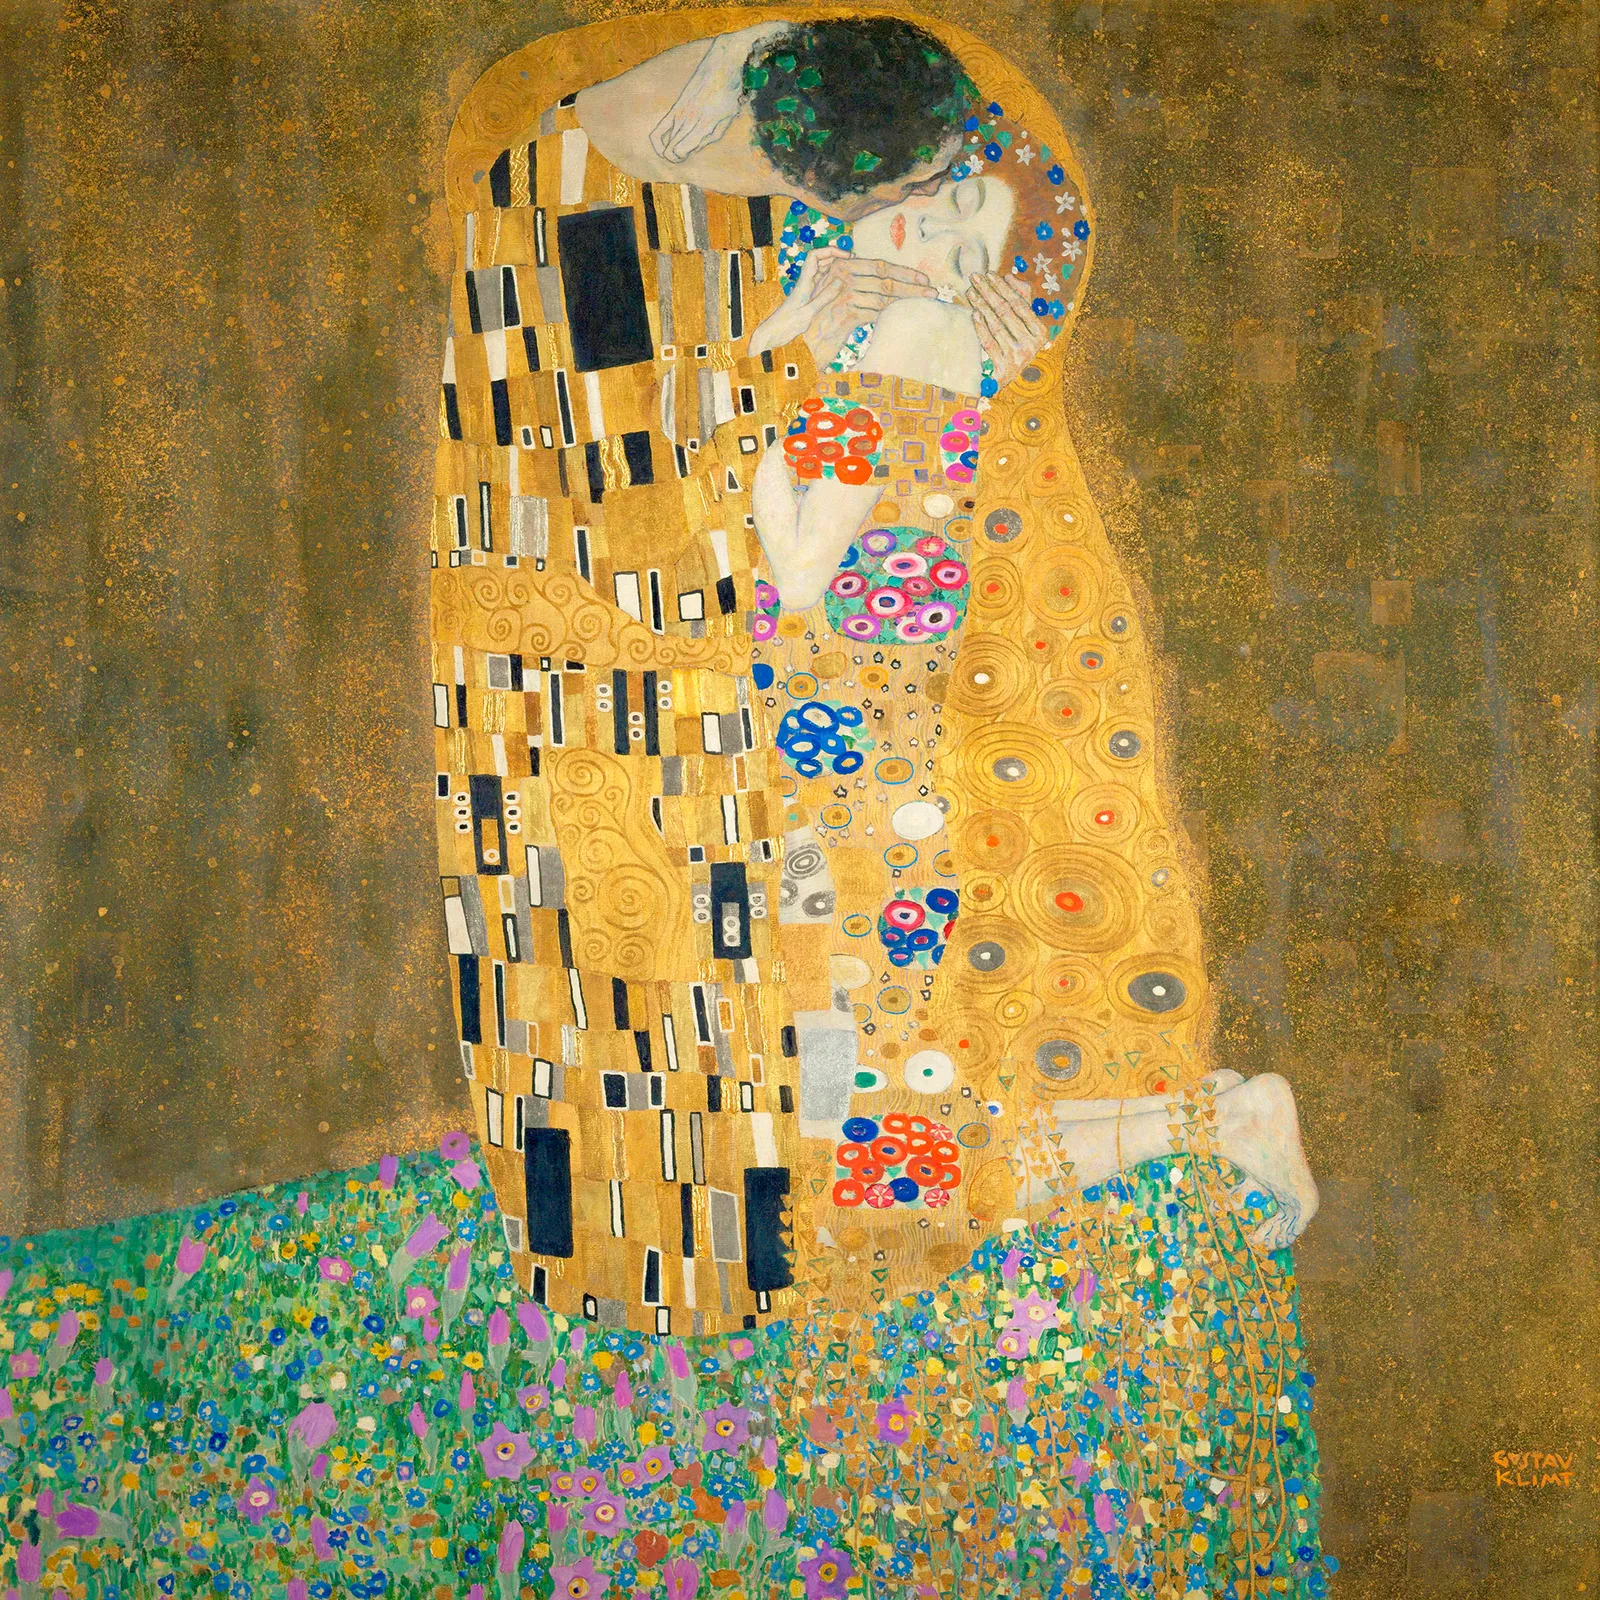 in which I imagine Gustav Klimt’s The Kiss is about infertility rather than lust